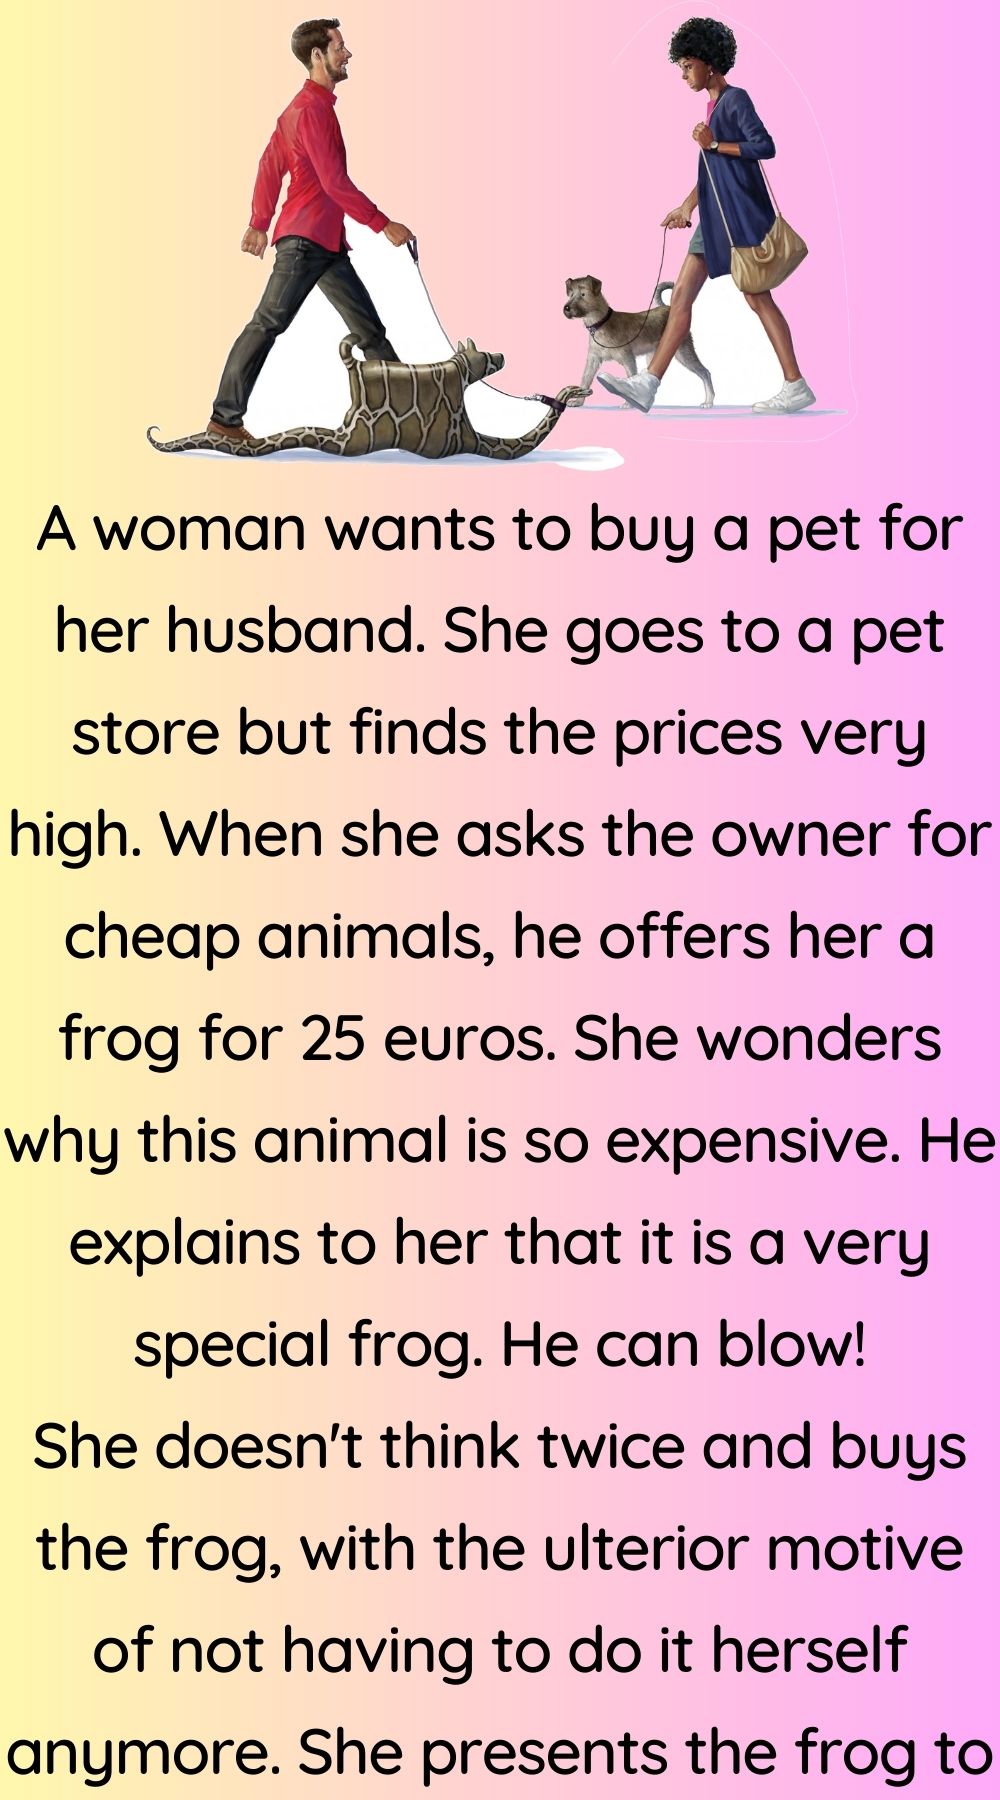 A woman wants to buy a pet for her husband